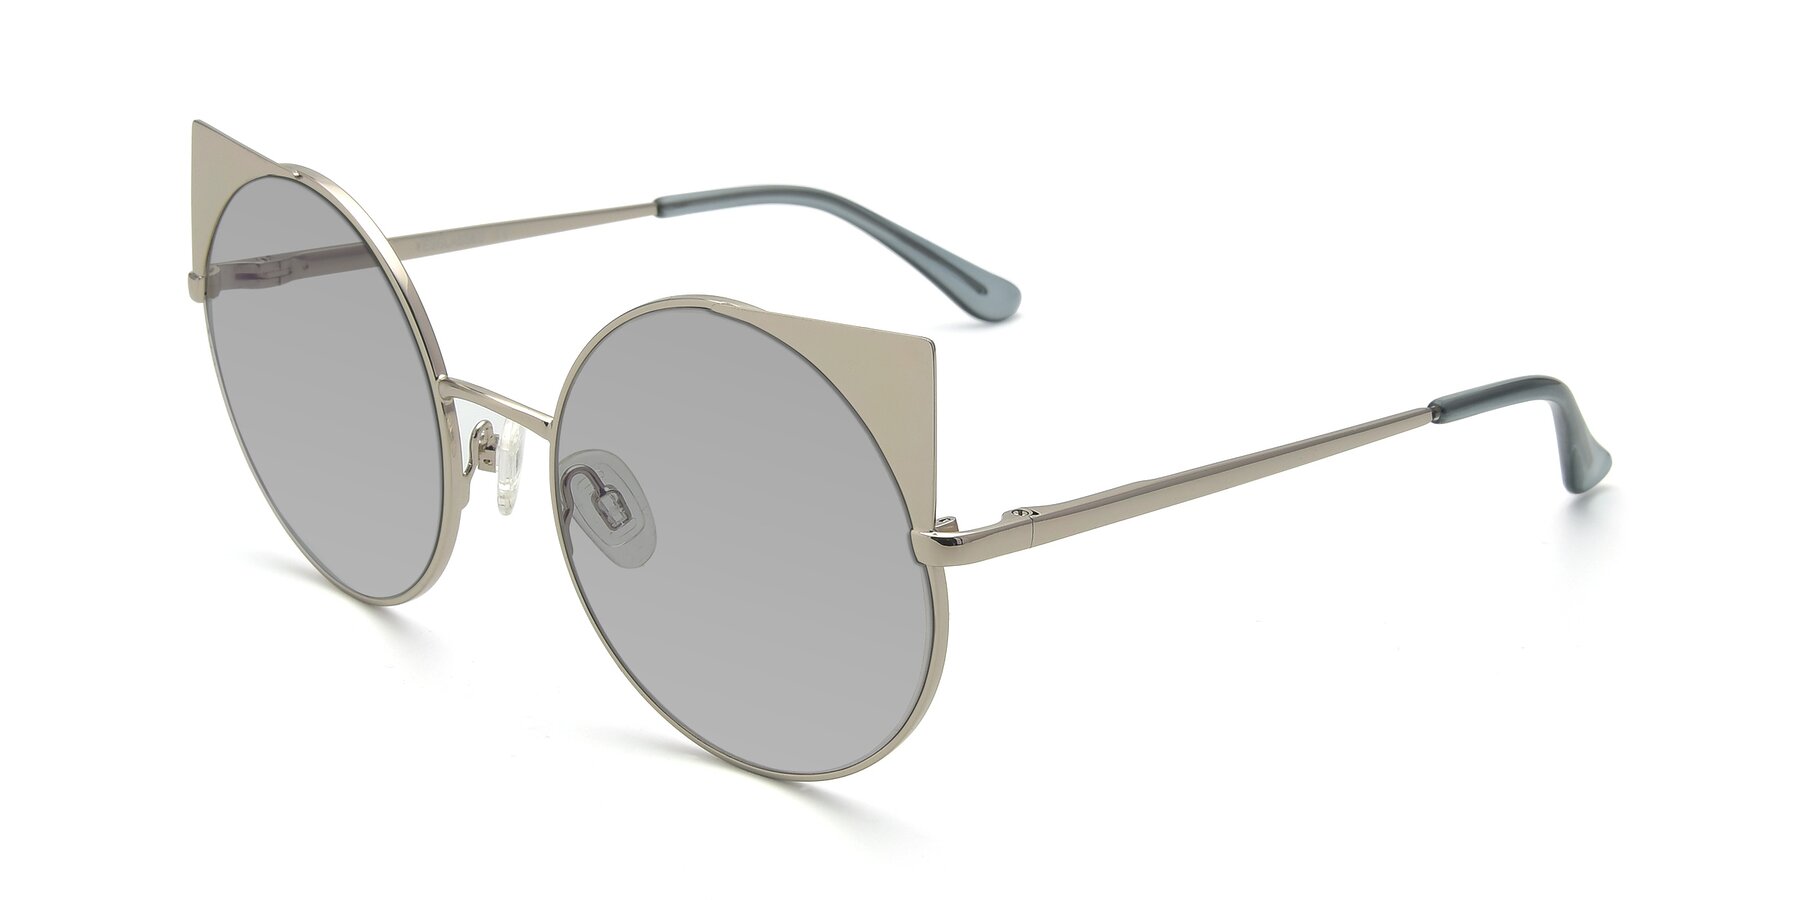 Angle of SSR1955 in Silver with Light Gray Tinted Lenses